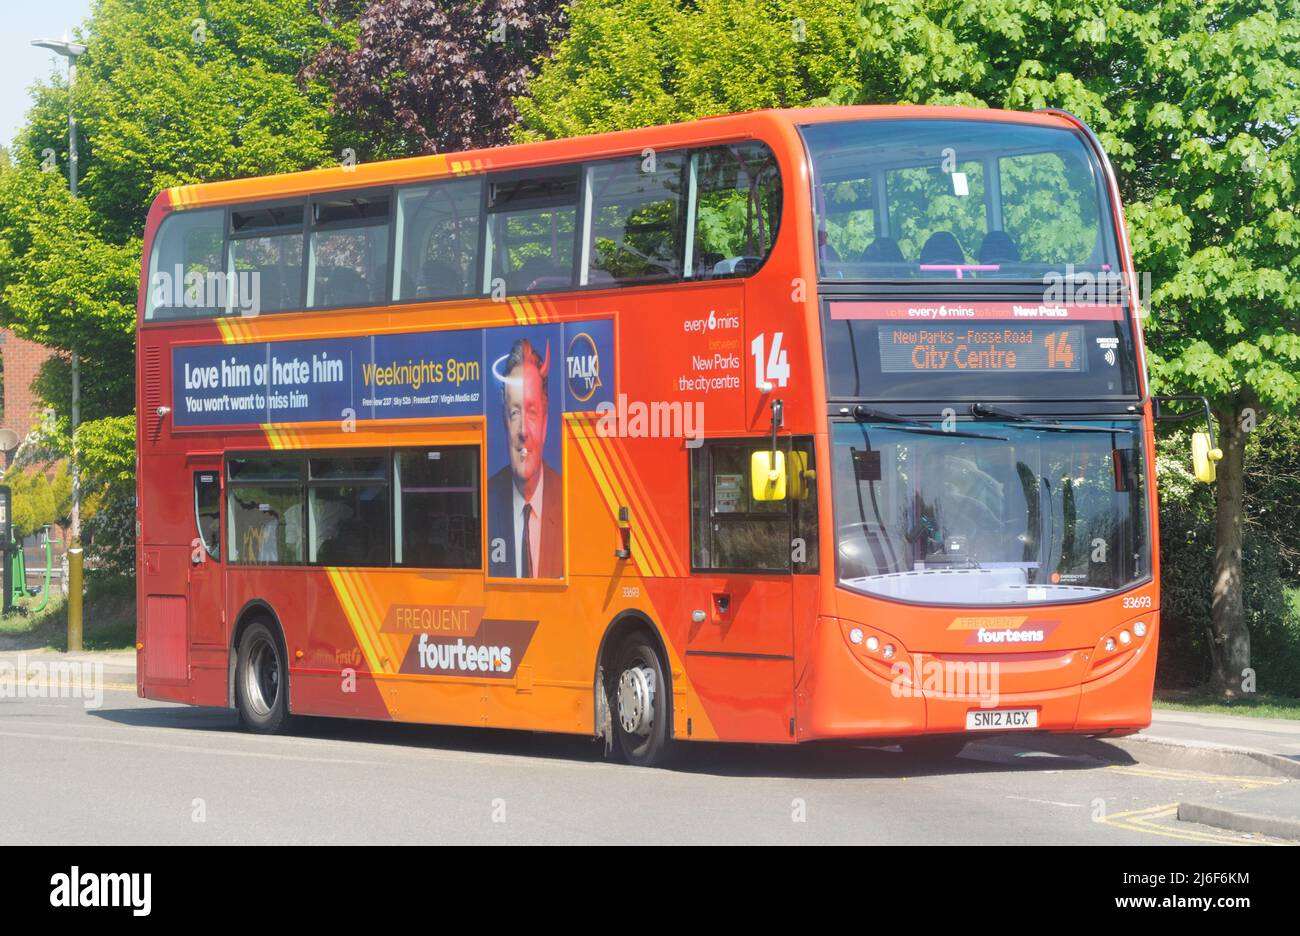 Alexander Dennis Enviro400 of FirstBus (fleet number 33693) allocated to service number 14 in Leicester, Leicestershire, England Stock Photo